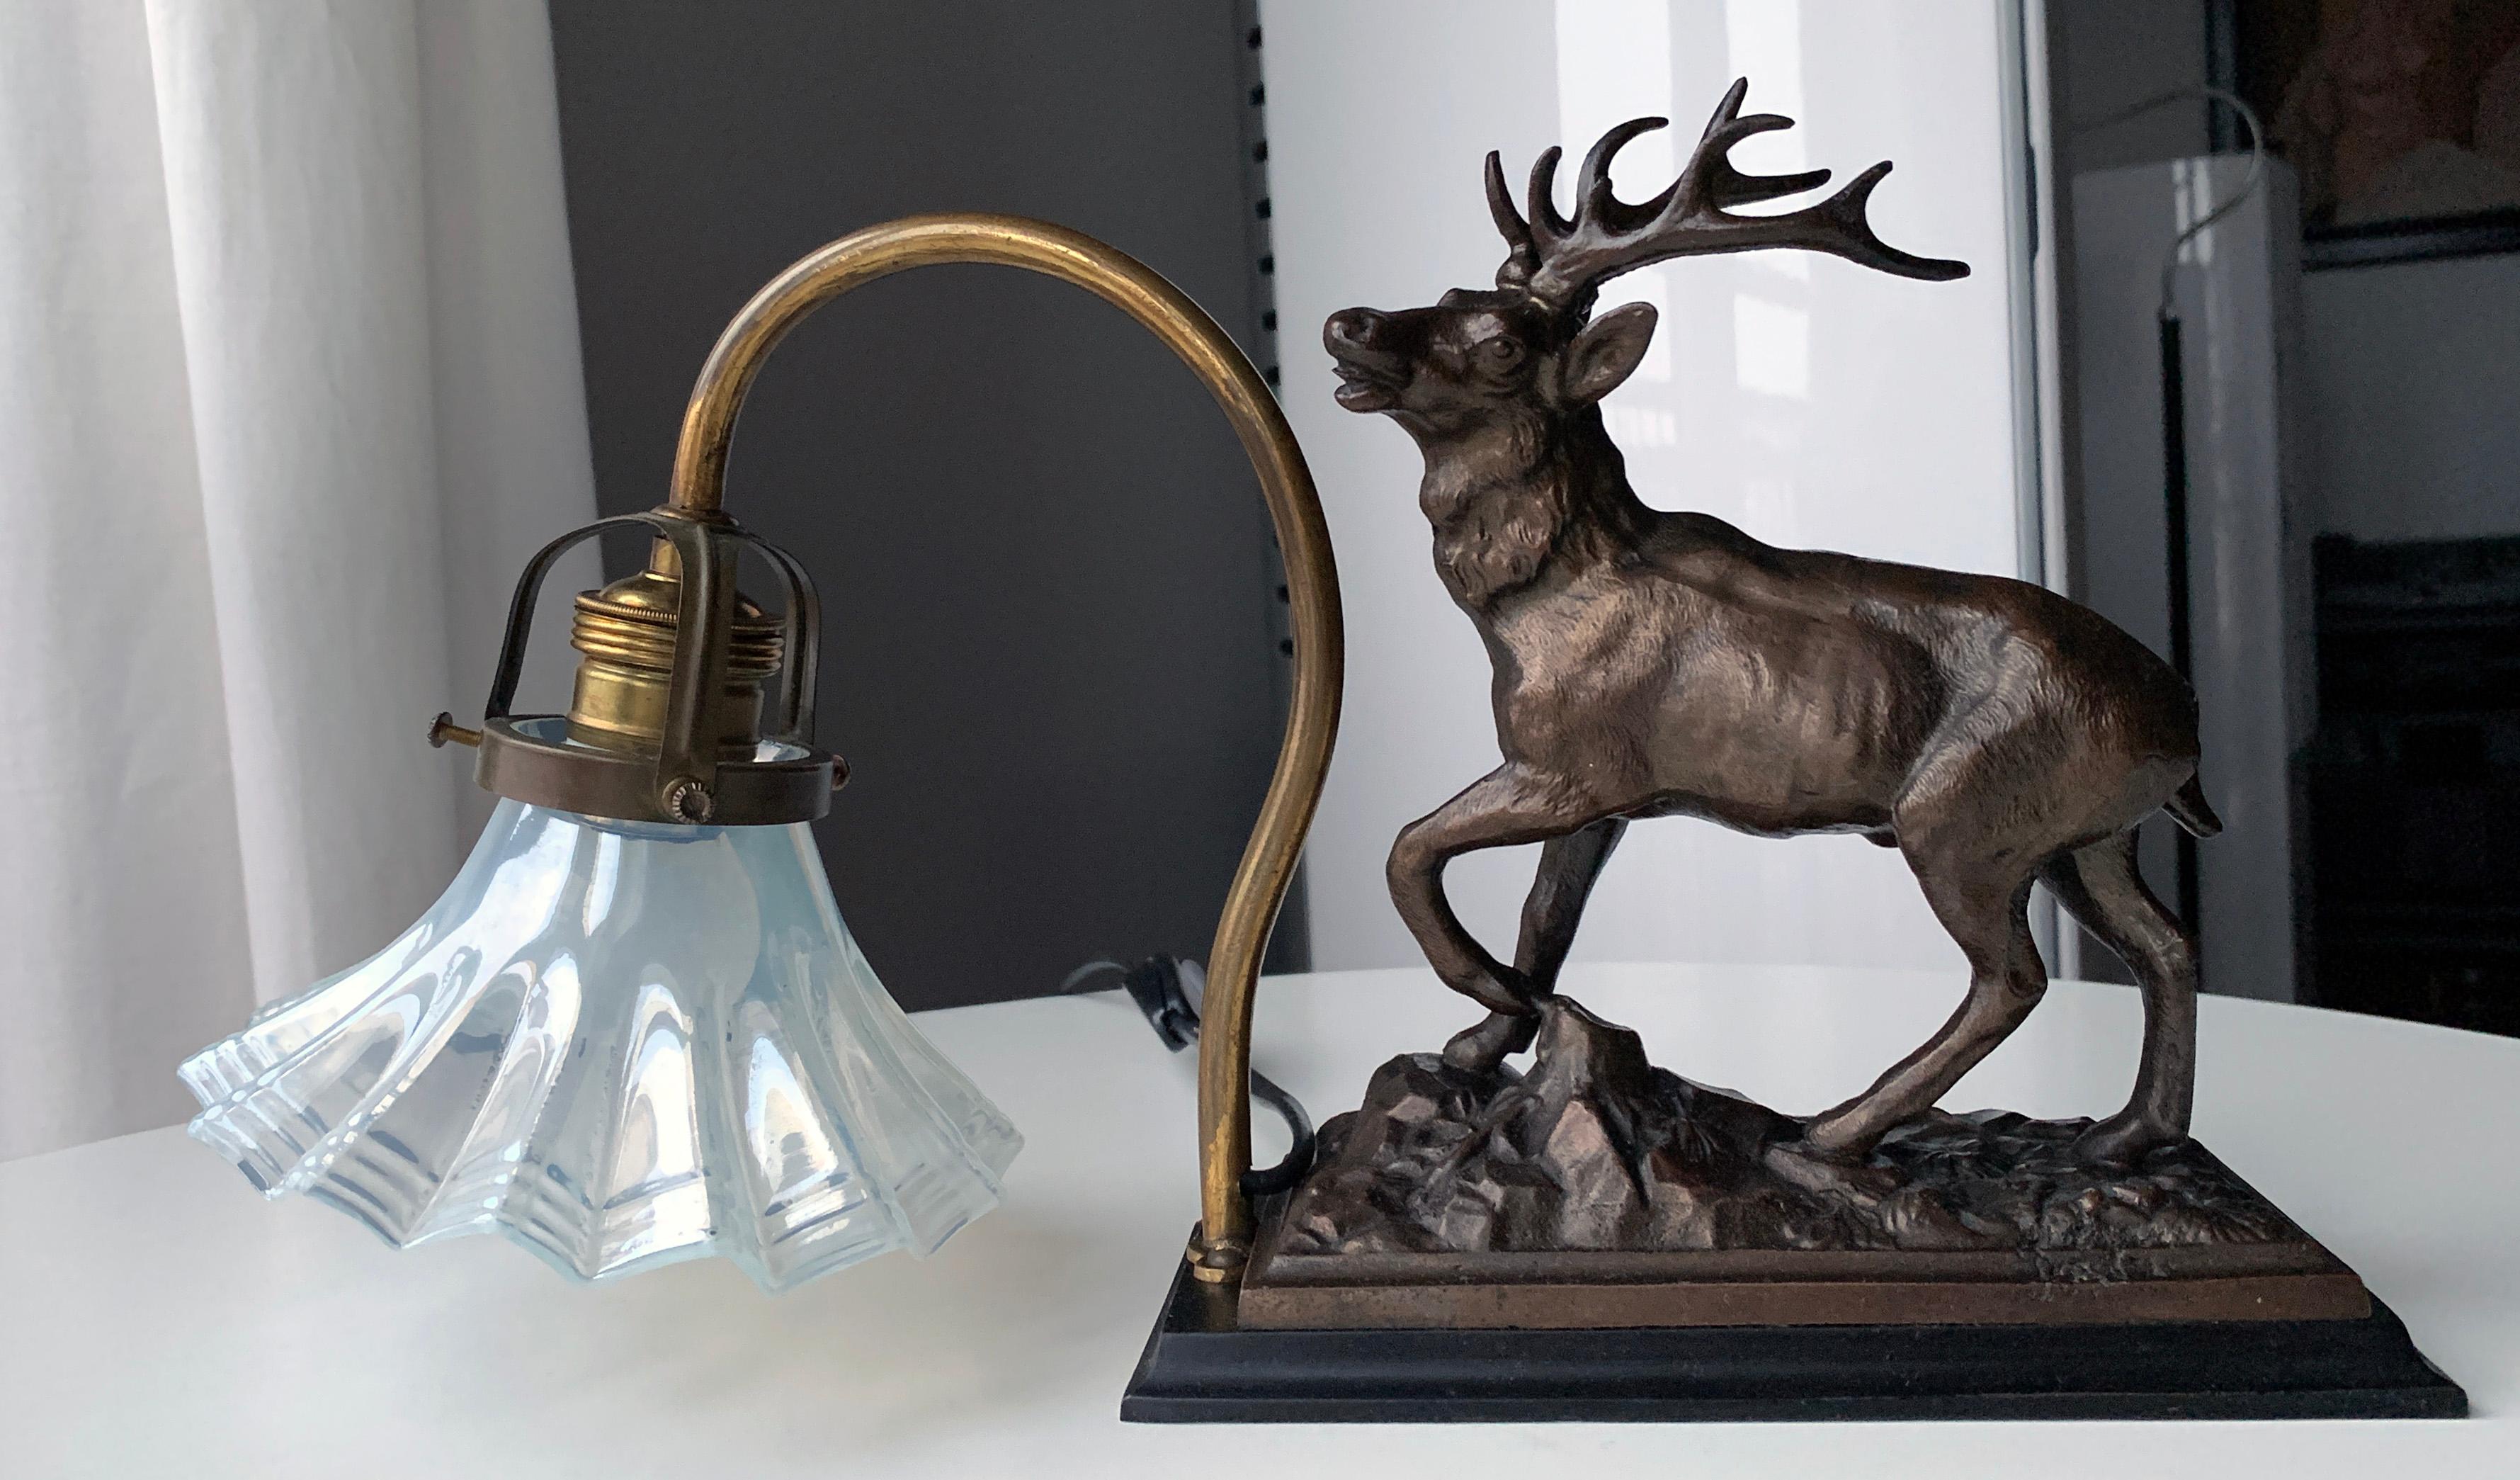 Danish red deer stag bookshelf lamp in Art Deco style. Sculptured bronze patinated zinc Red Deer Stag mounted on black metal plinth. Brass tubular arm with glass holder. Sculptural semi transparent glass shade with a milky appearance. New black